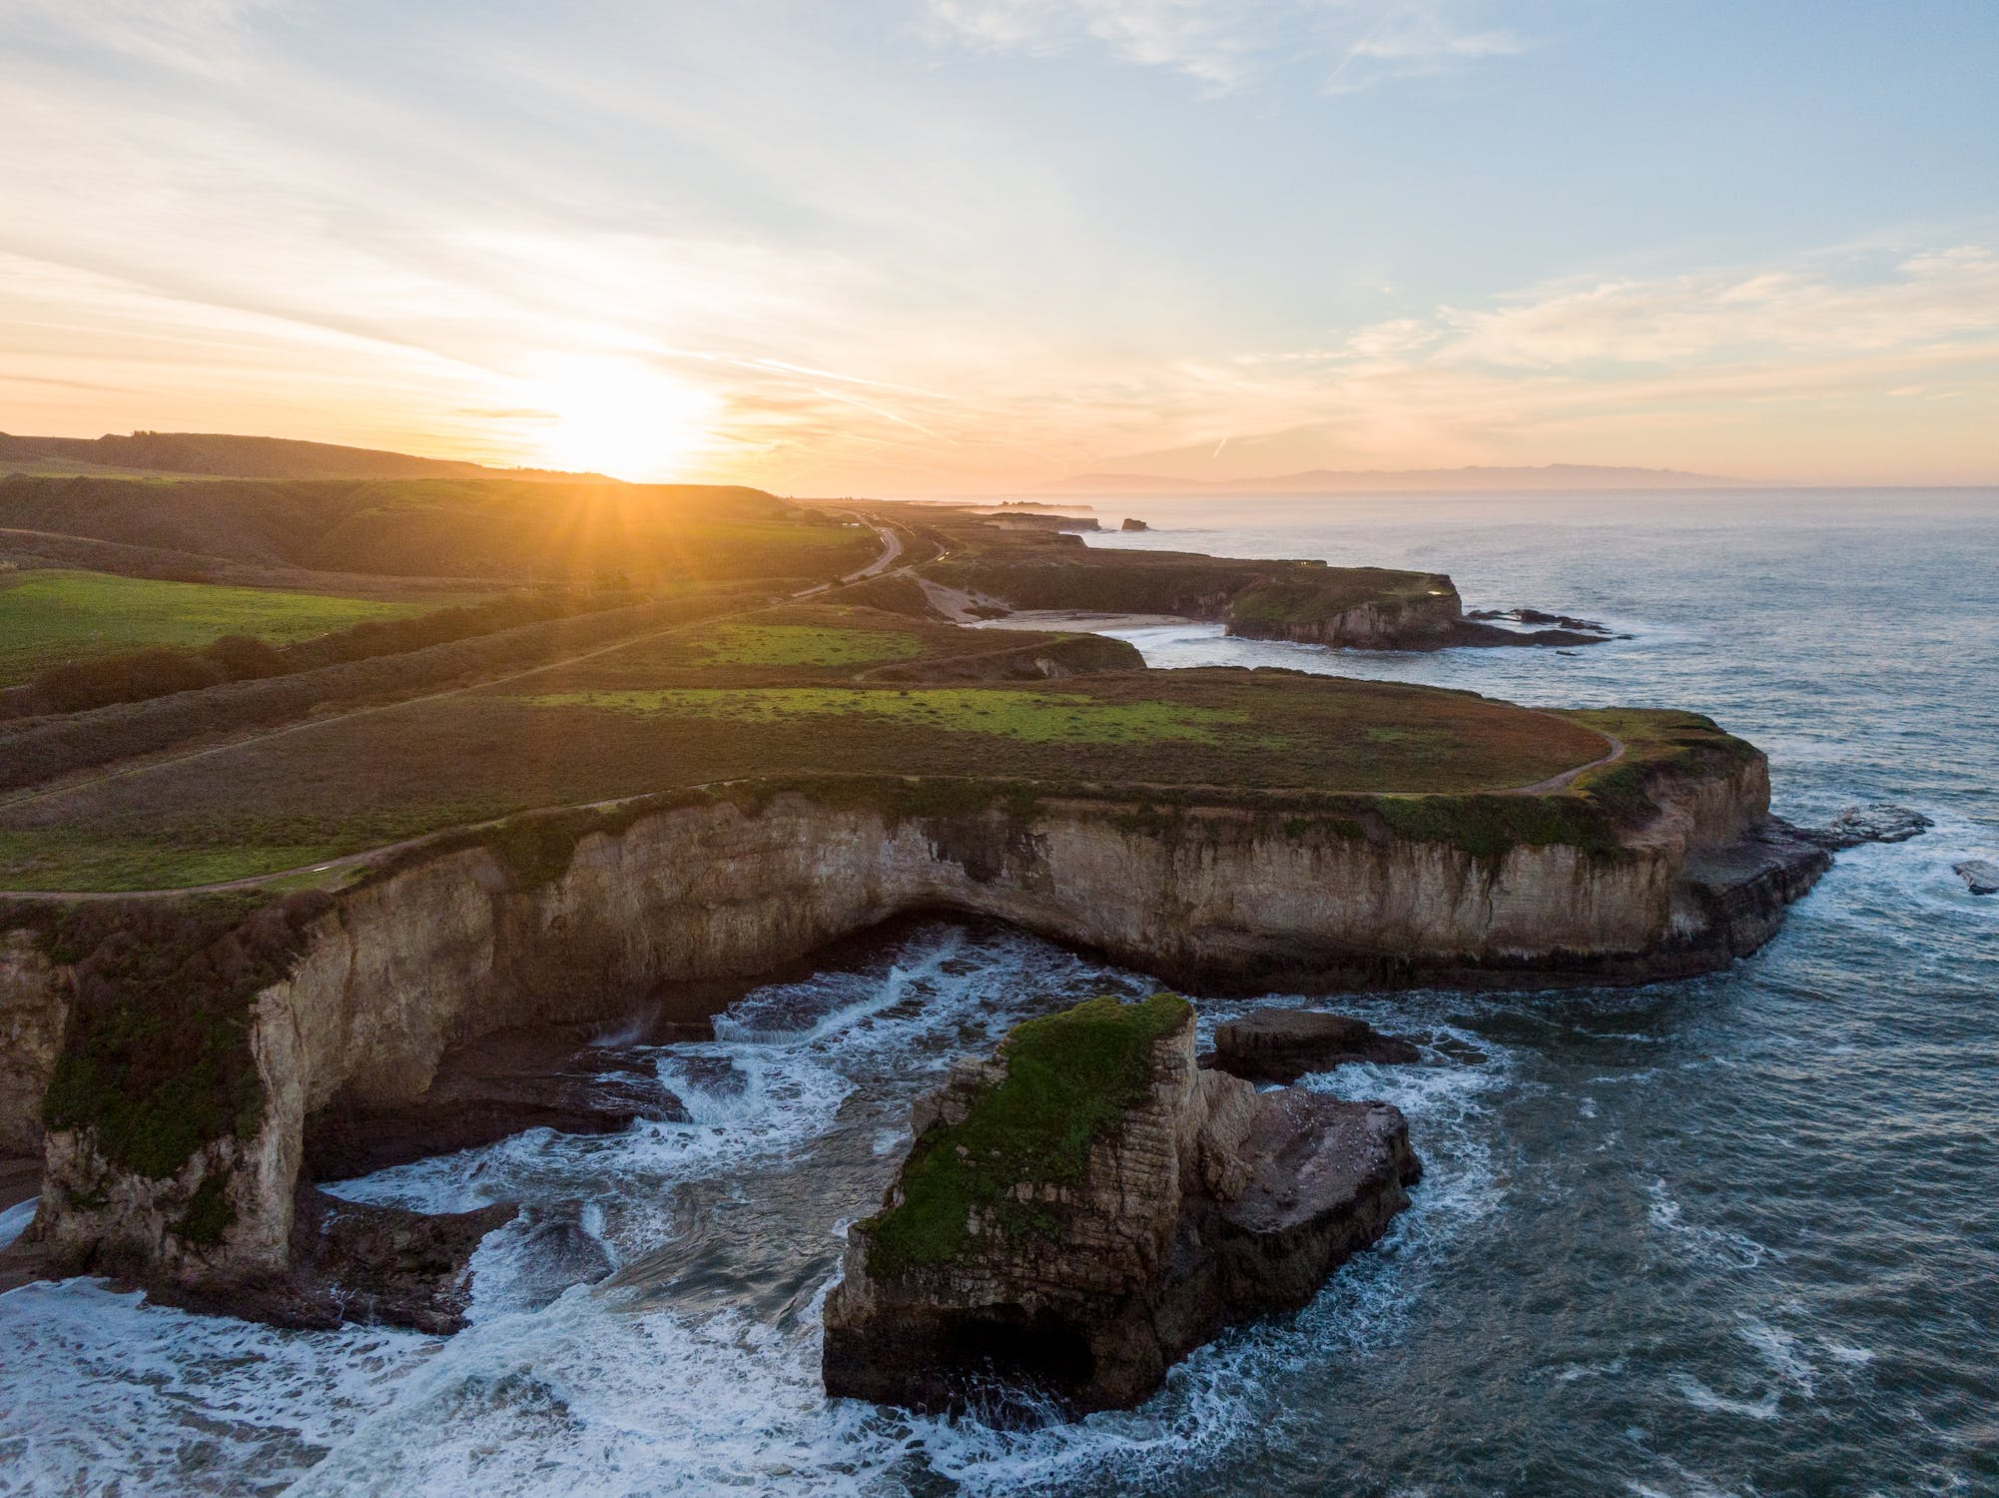 This is an image of a cliffside by the ocean at sunset.